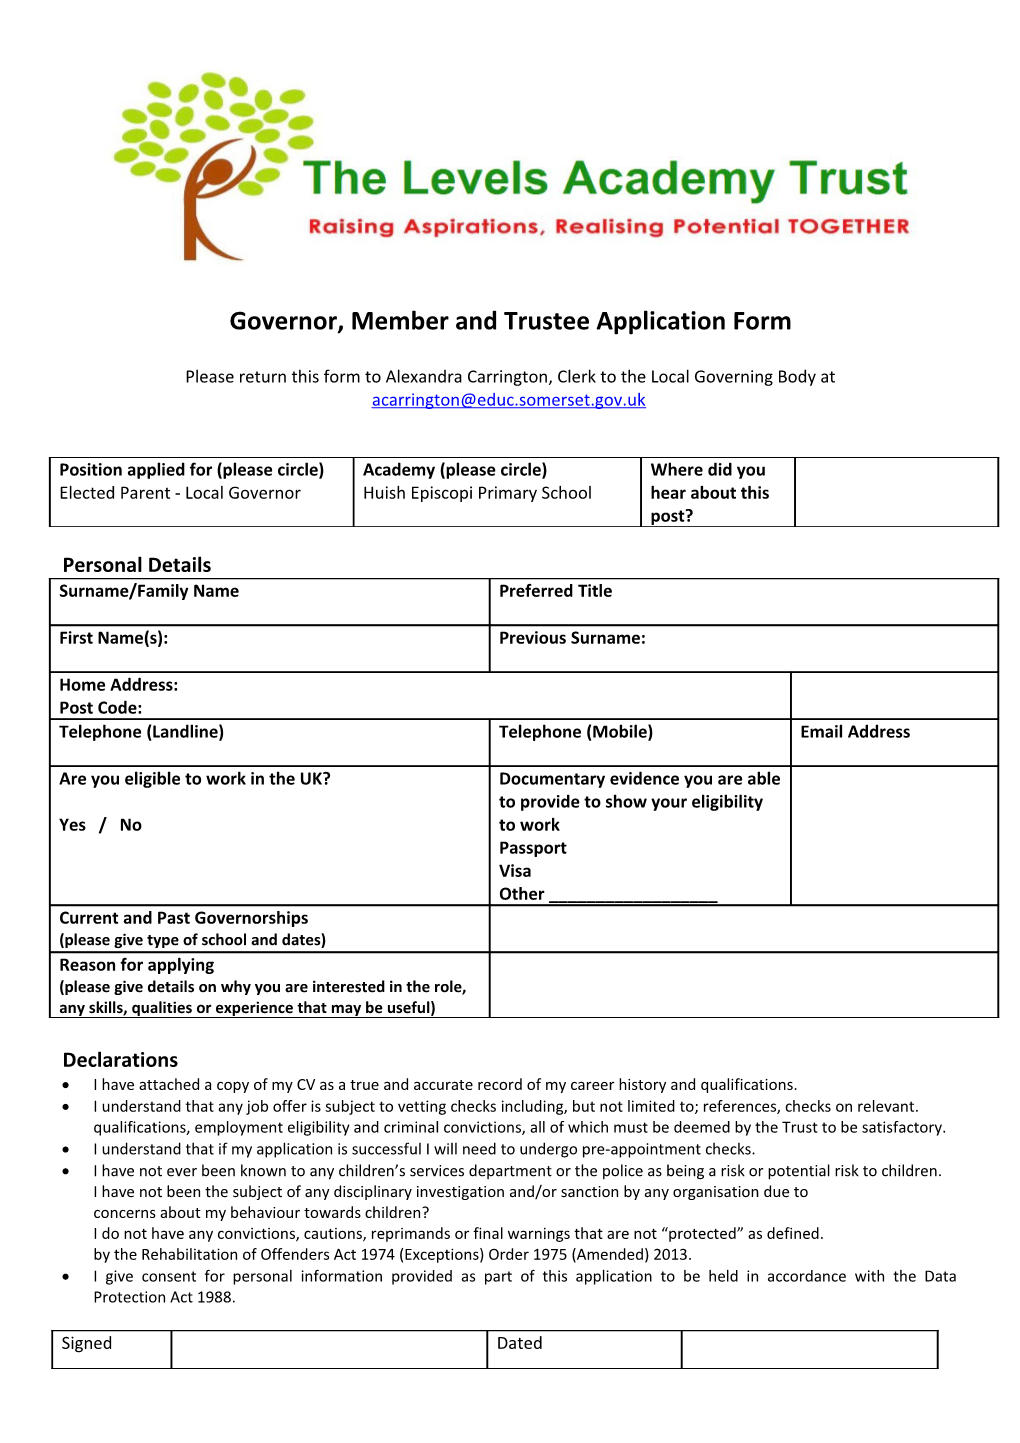 Governor, Member and Trustee Application Form